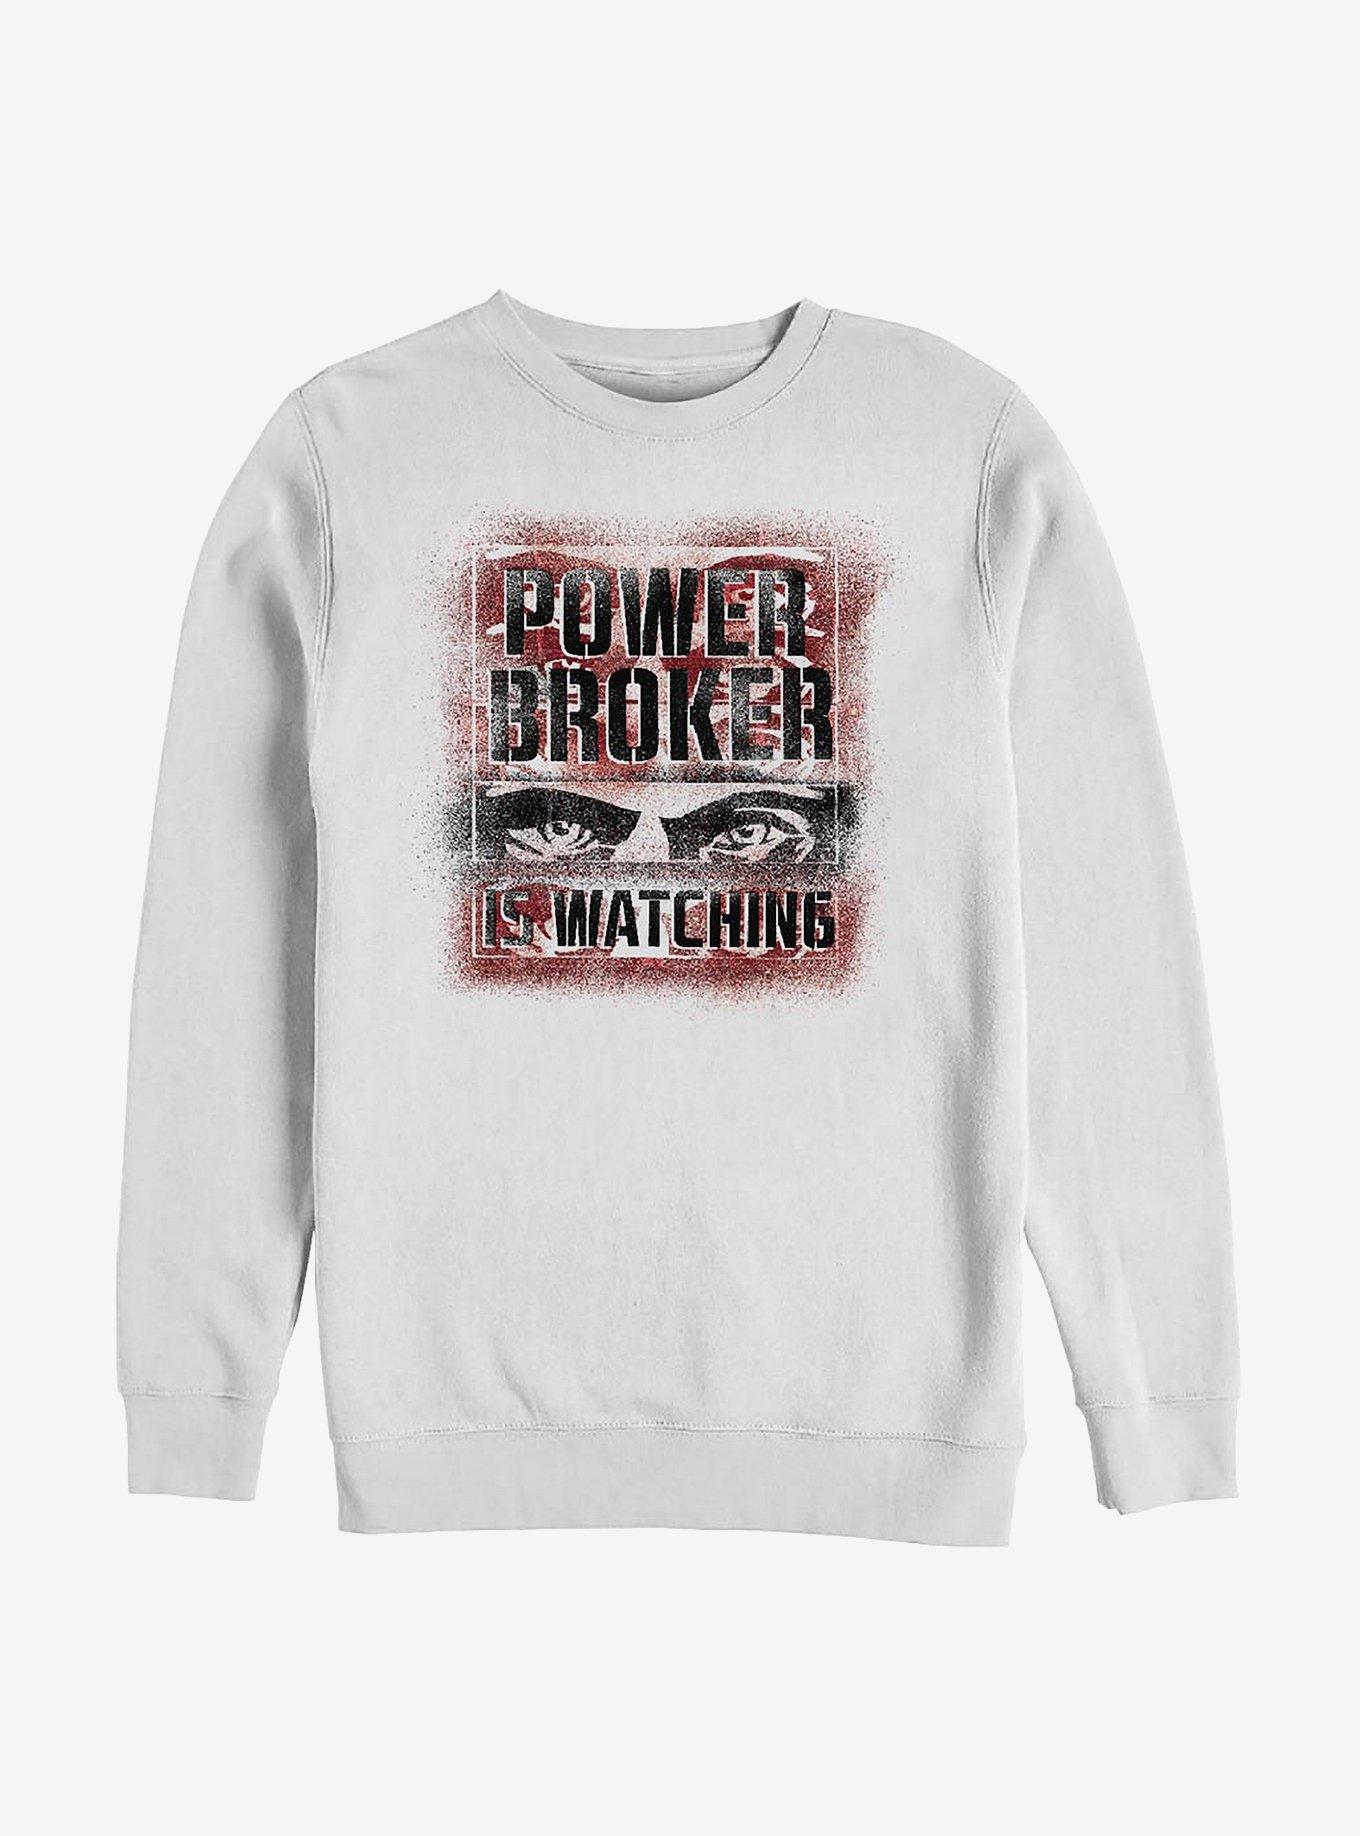 Marvel The Falcon And The Winter Soldier Symbols Need Meaning Crew Sweatshirt, WHITE, hi-res